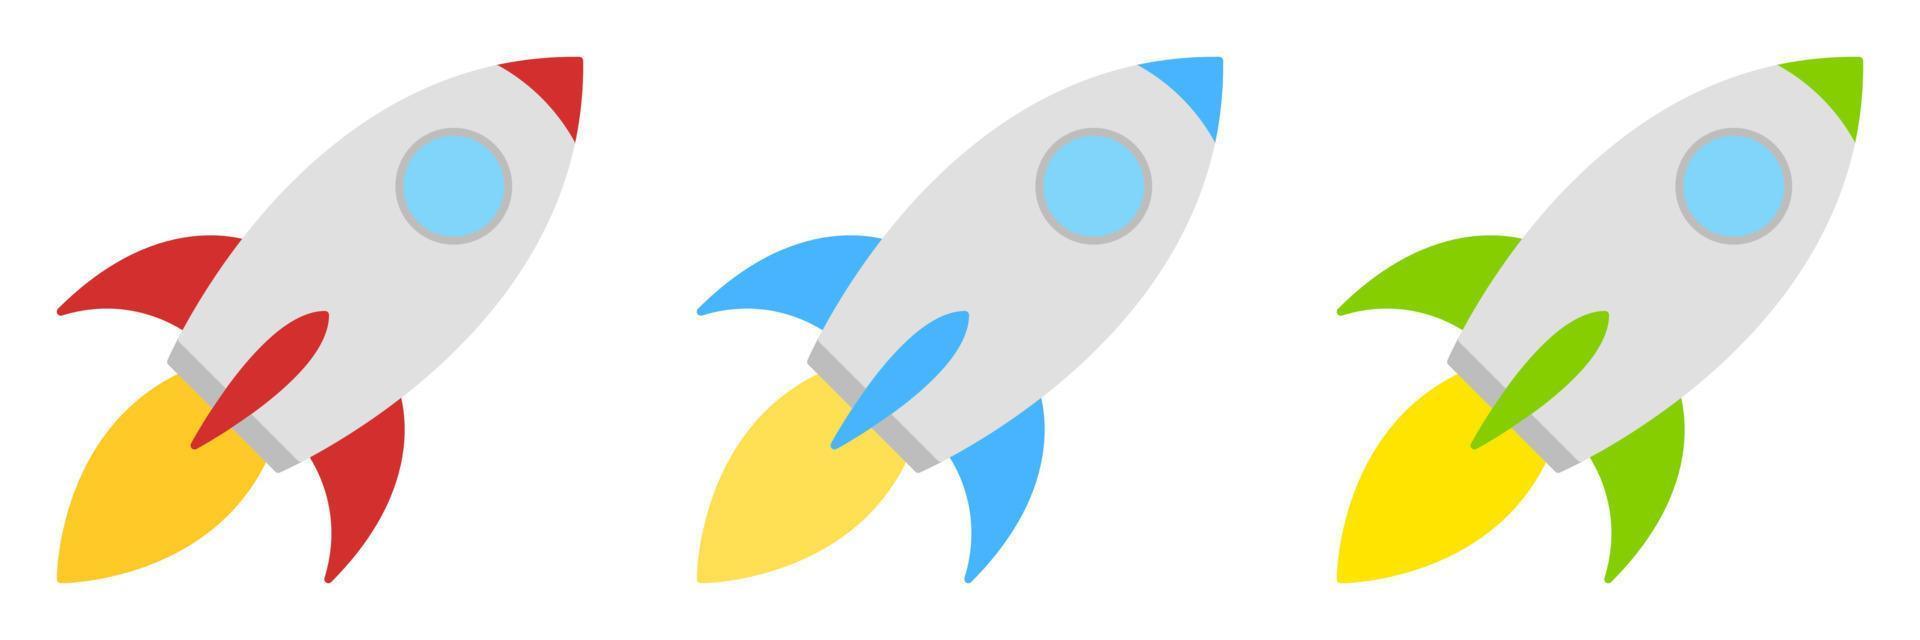 Rocket in flat style isolated vector